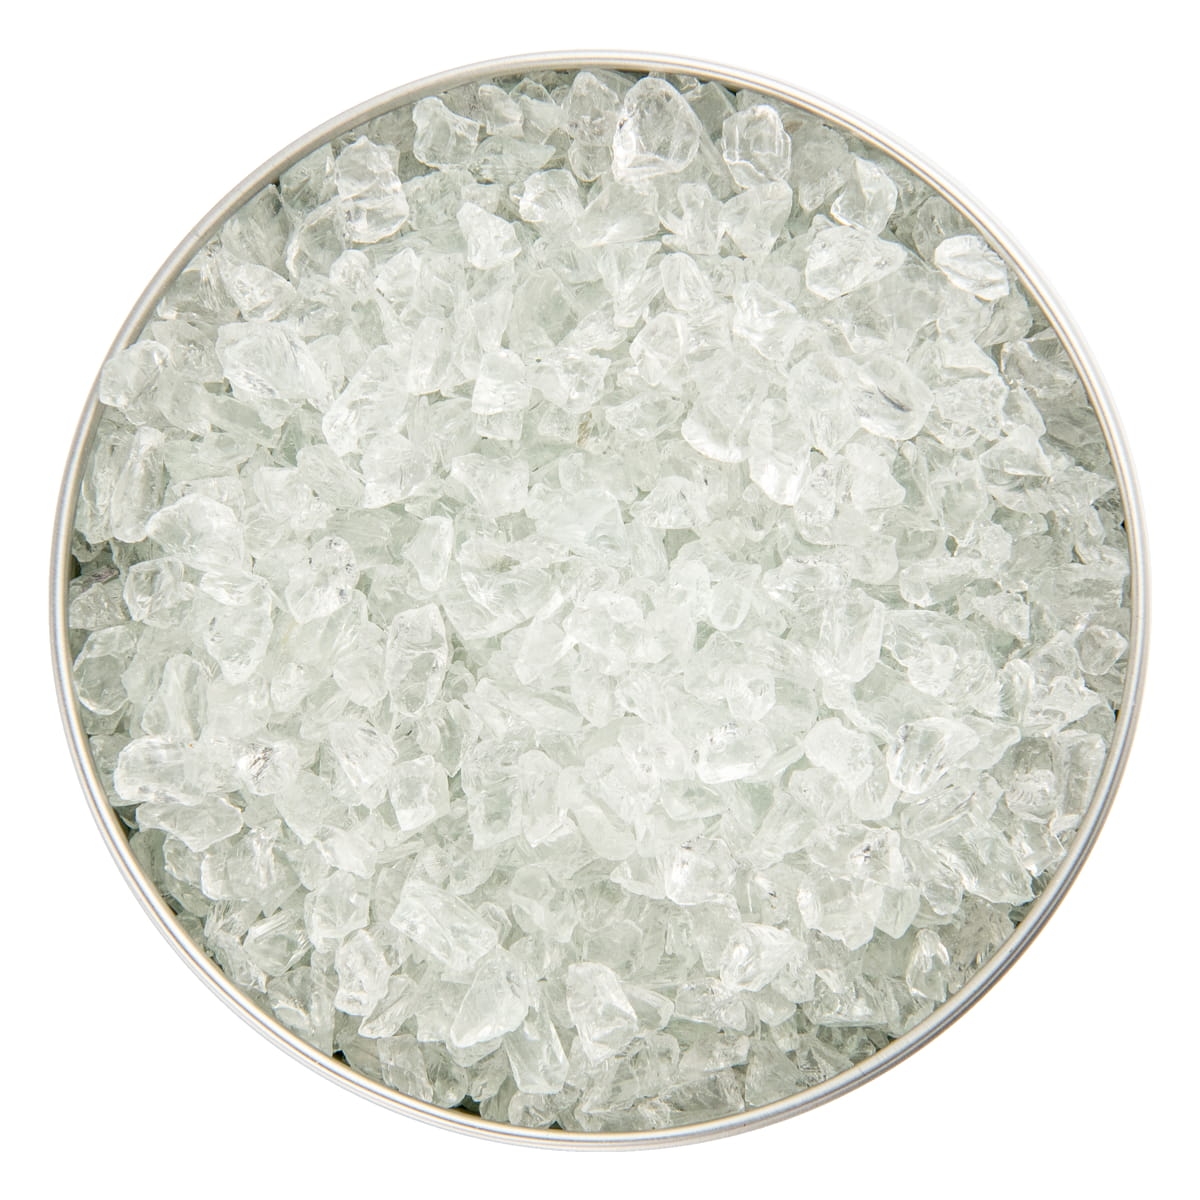 Clear Crushed Glass